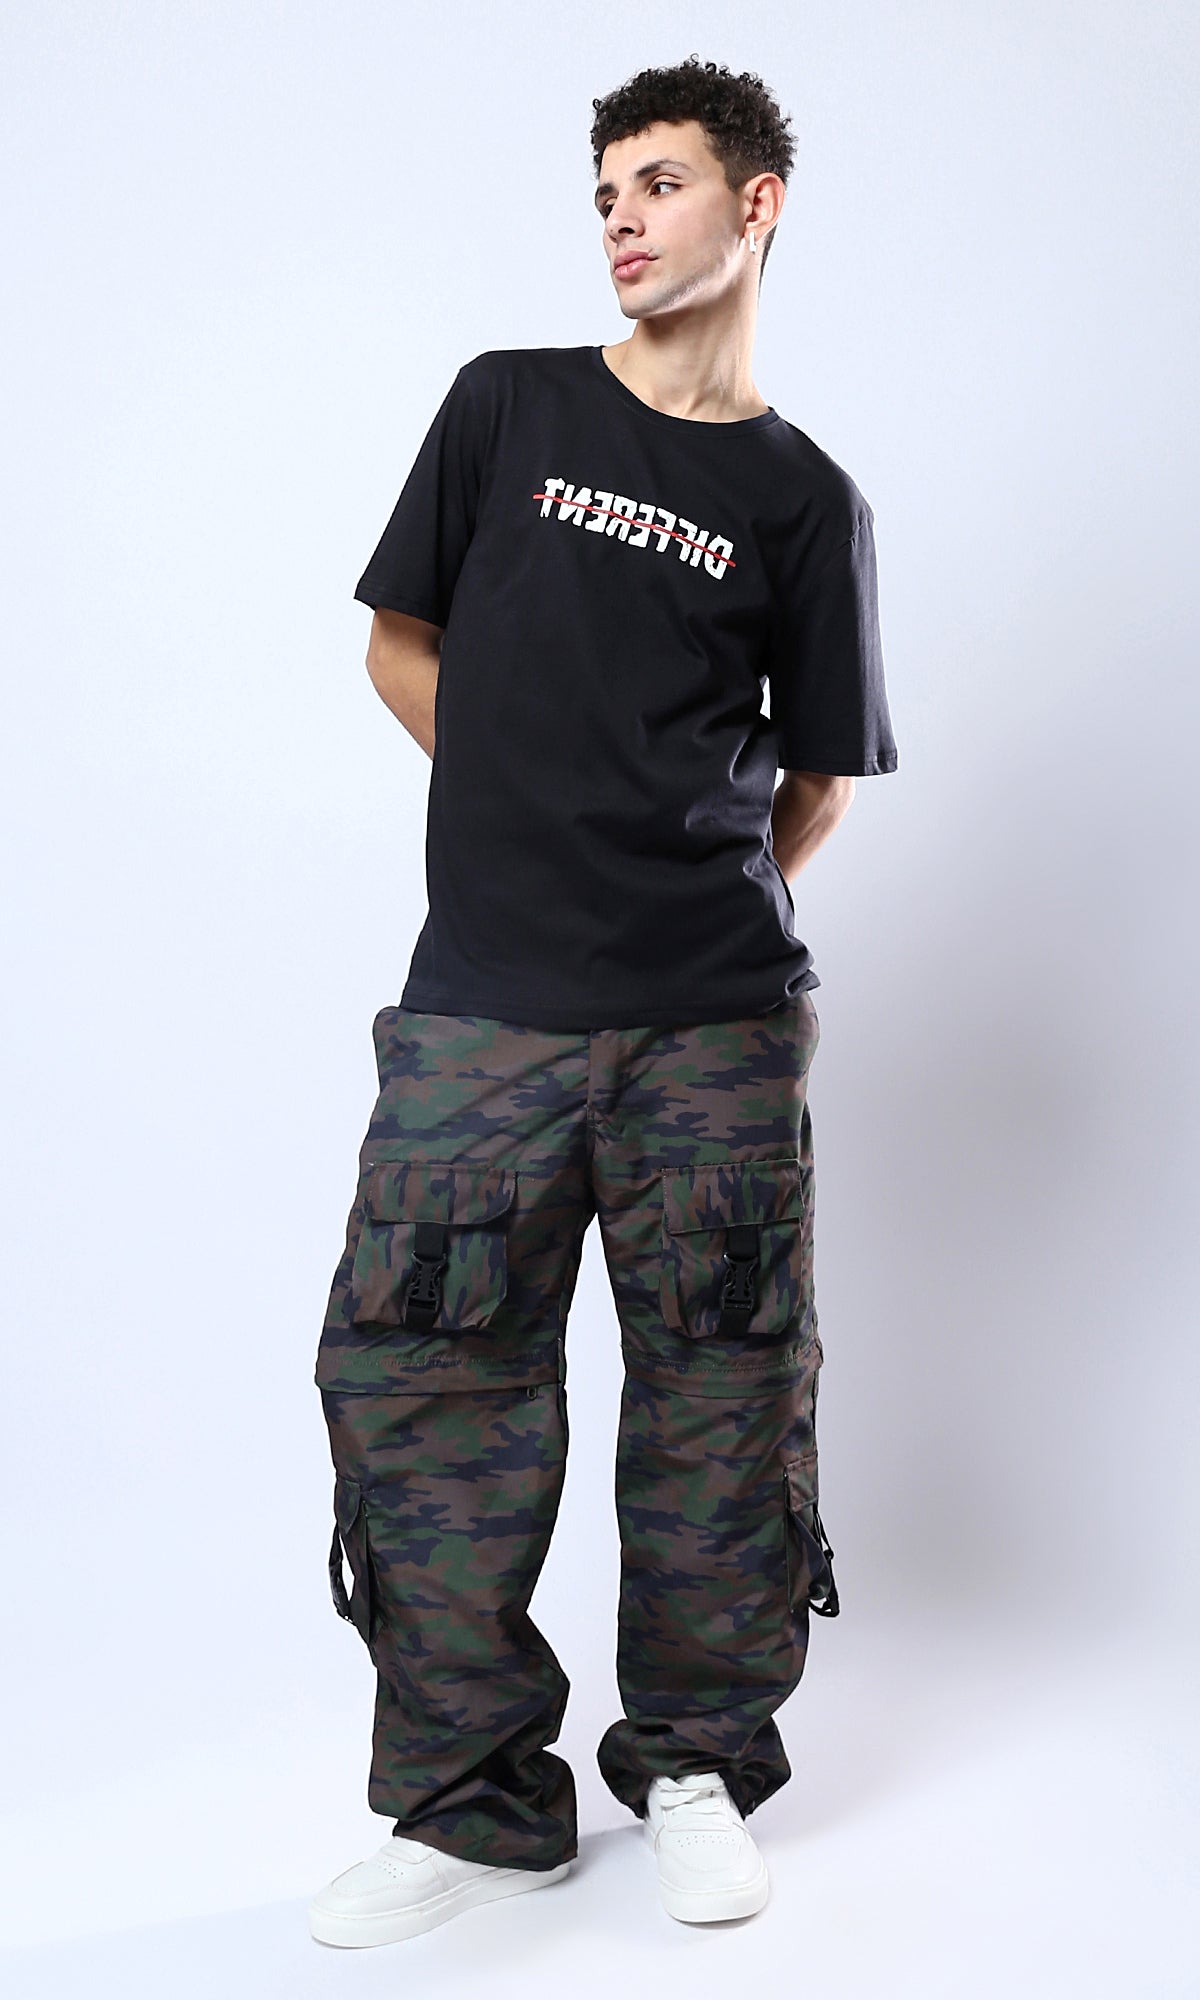 O178962 "Different" Front Print & Back Comfy Tee - Black